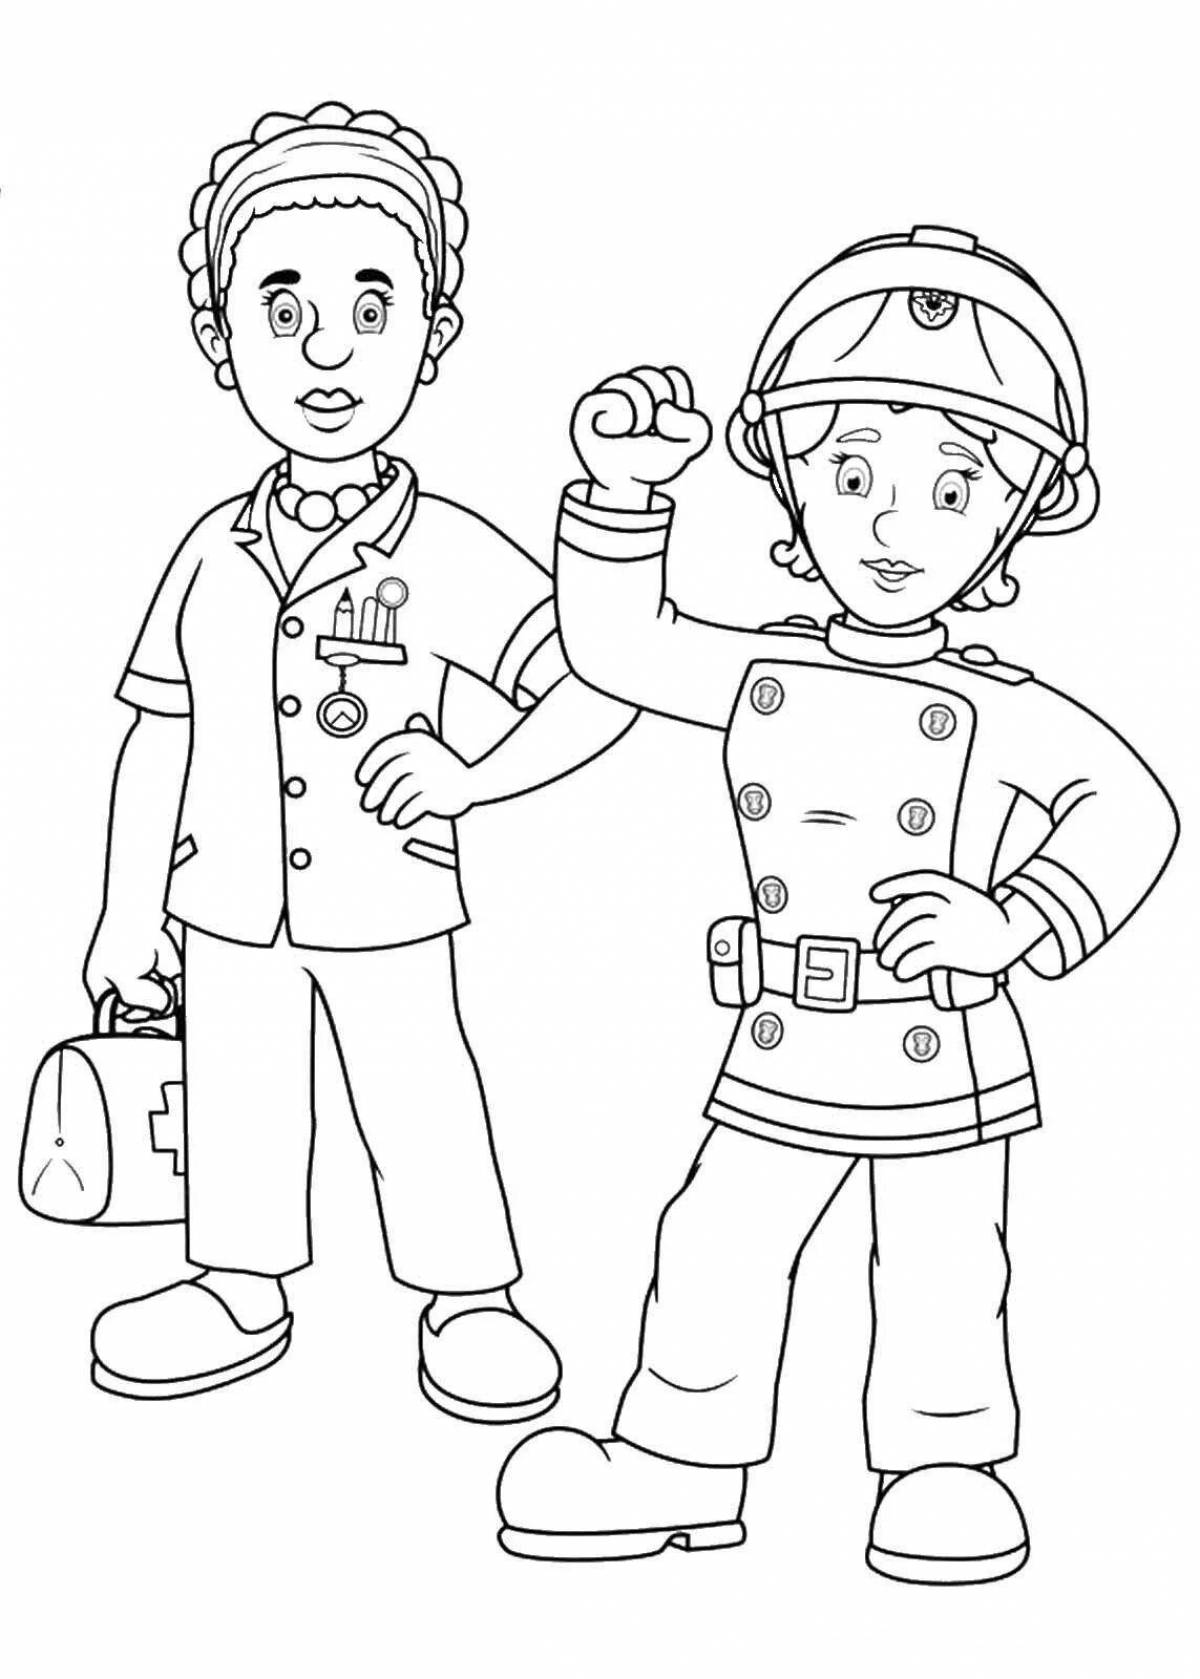 Colouring funny labor protection